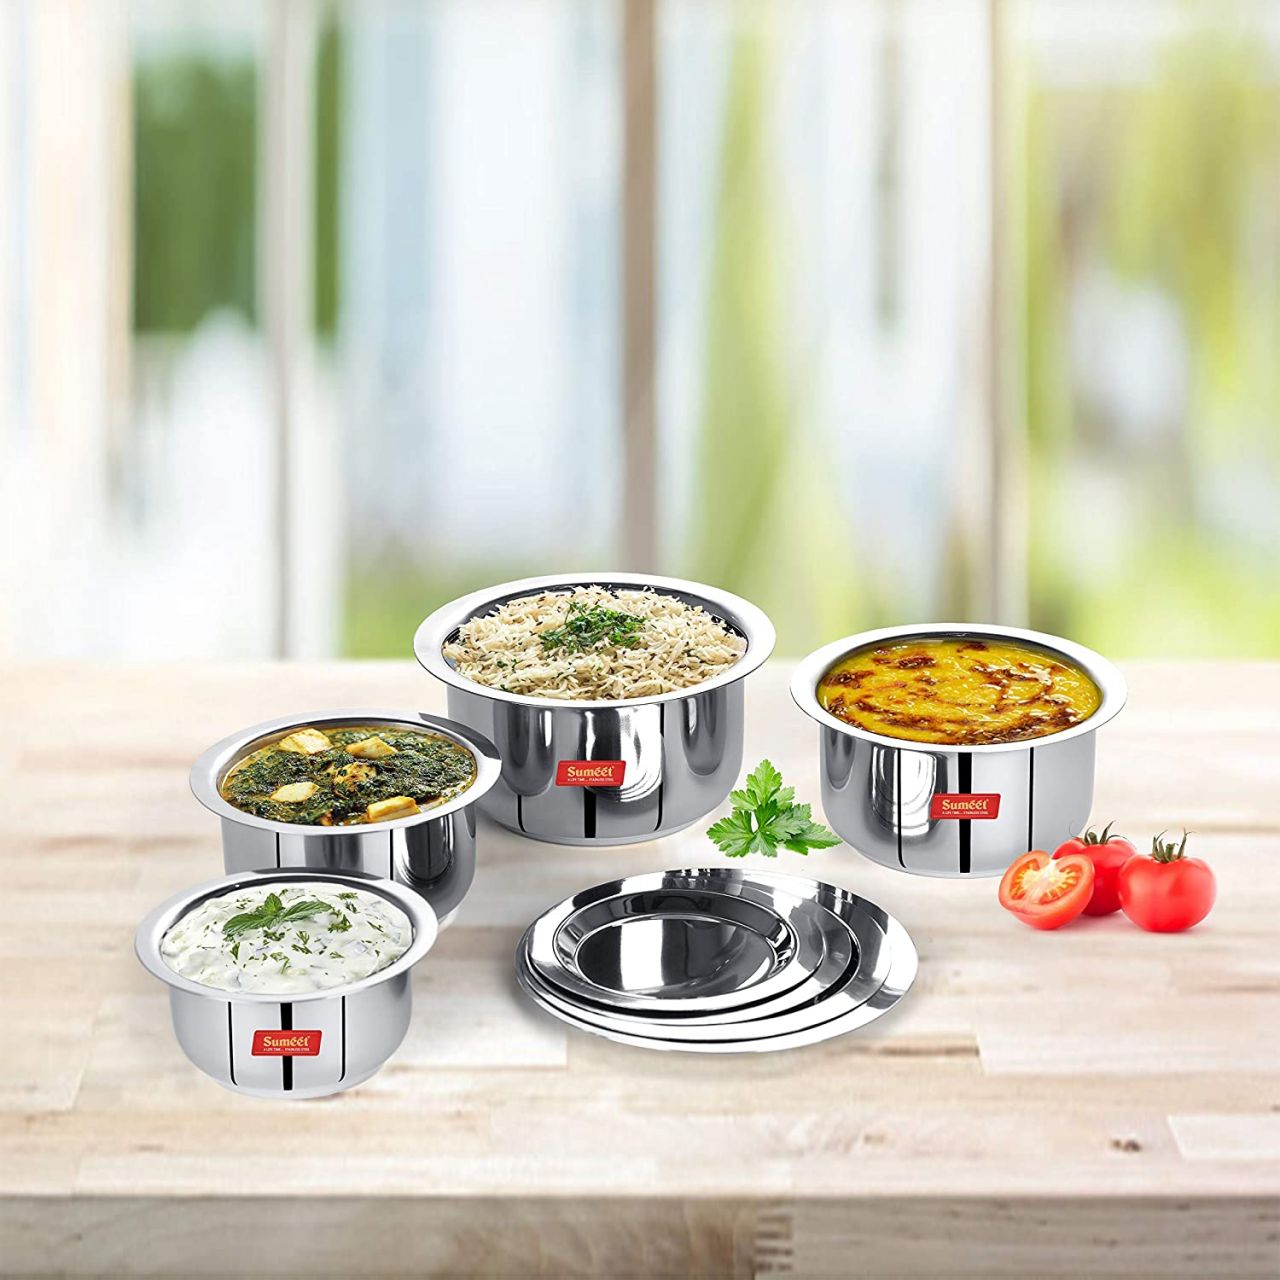 Sumeet Stainless Steel Friendly Tope/patila/cookware With Lids, 370ML, 550ML, 800ML, 1100ML, 4 Piece (Steel)